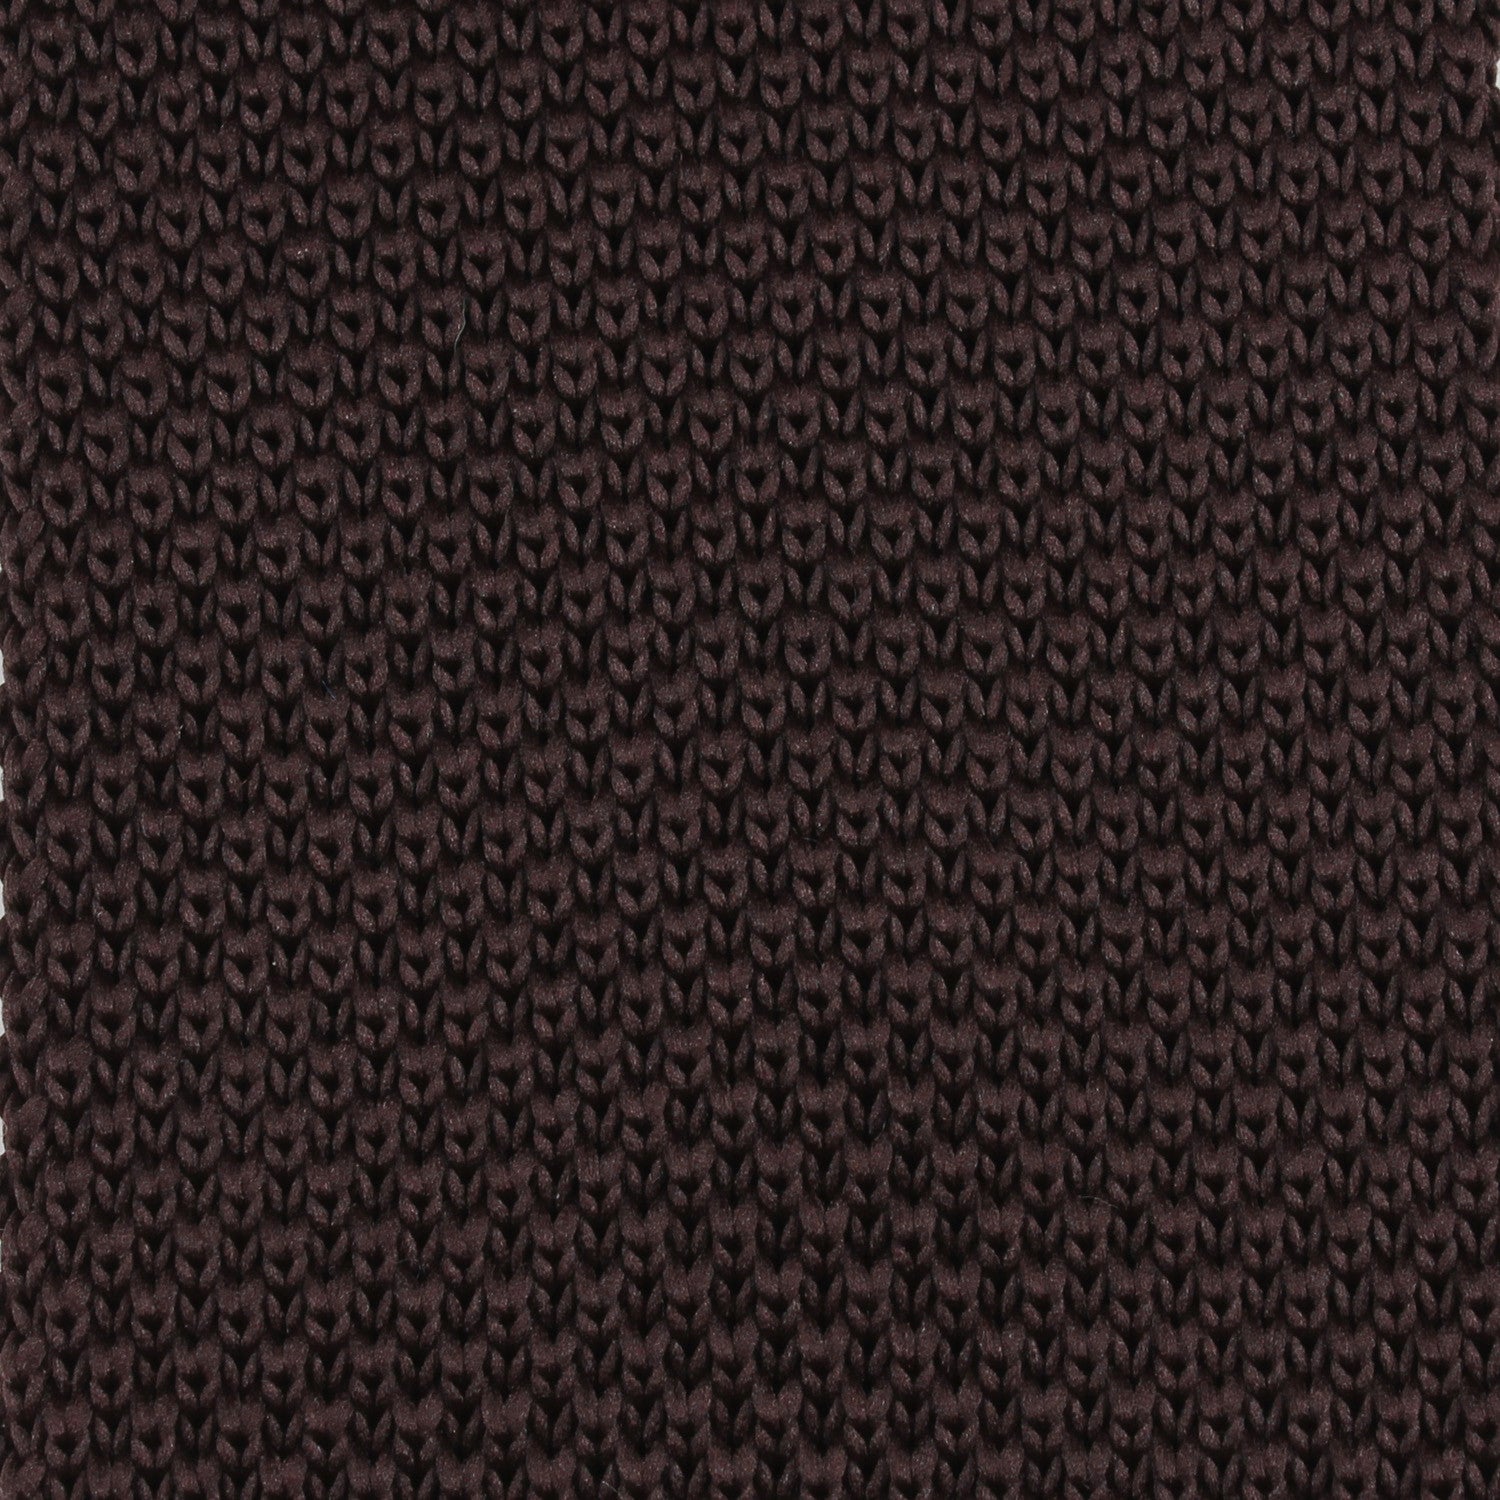 Brown Knitted Tie Detail View